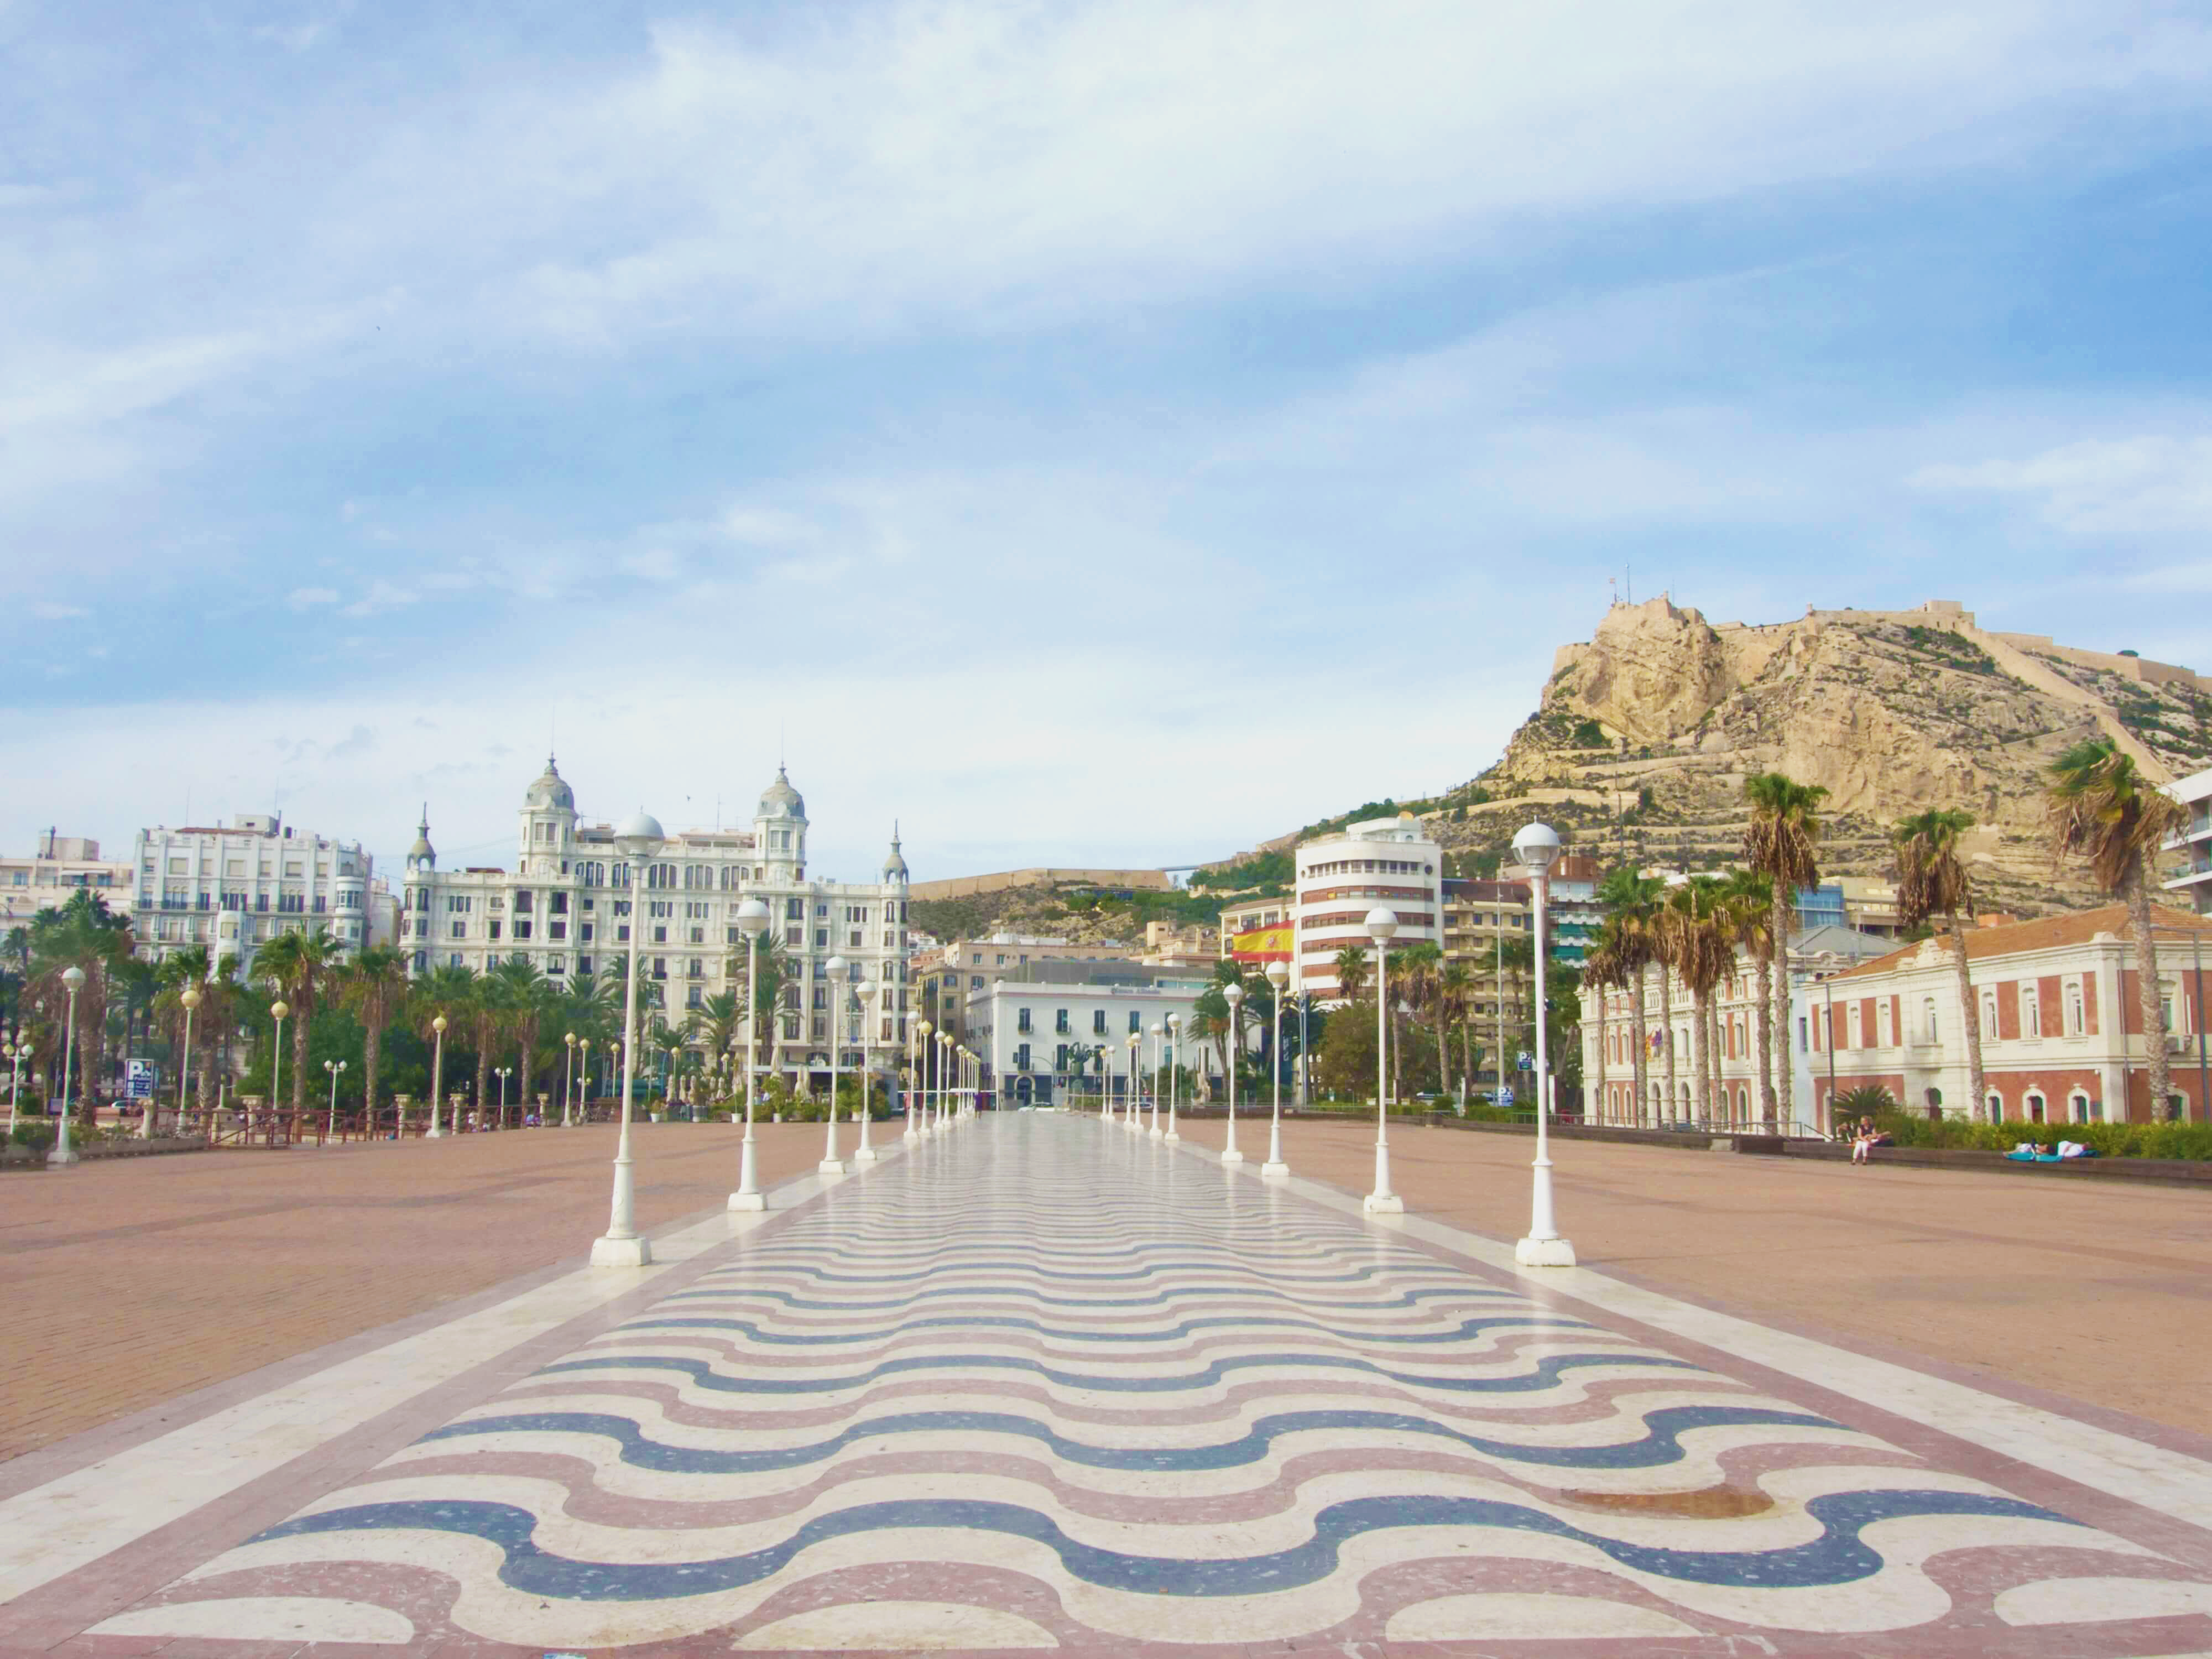 Alicante, a city for the 21st century